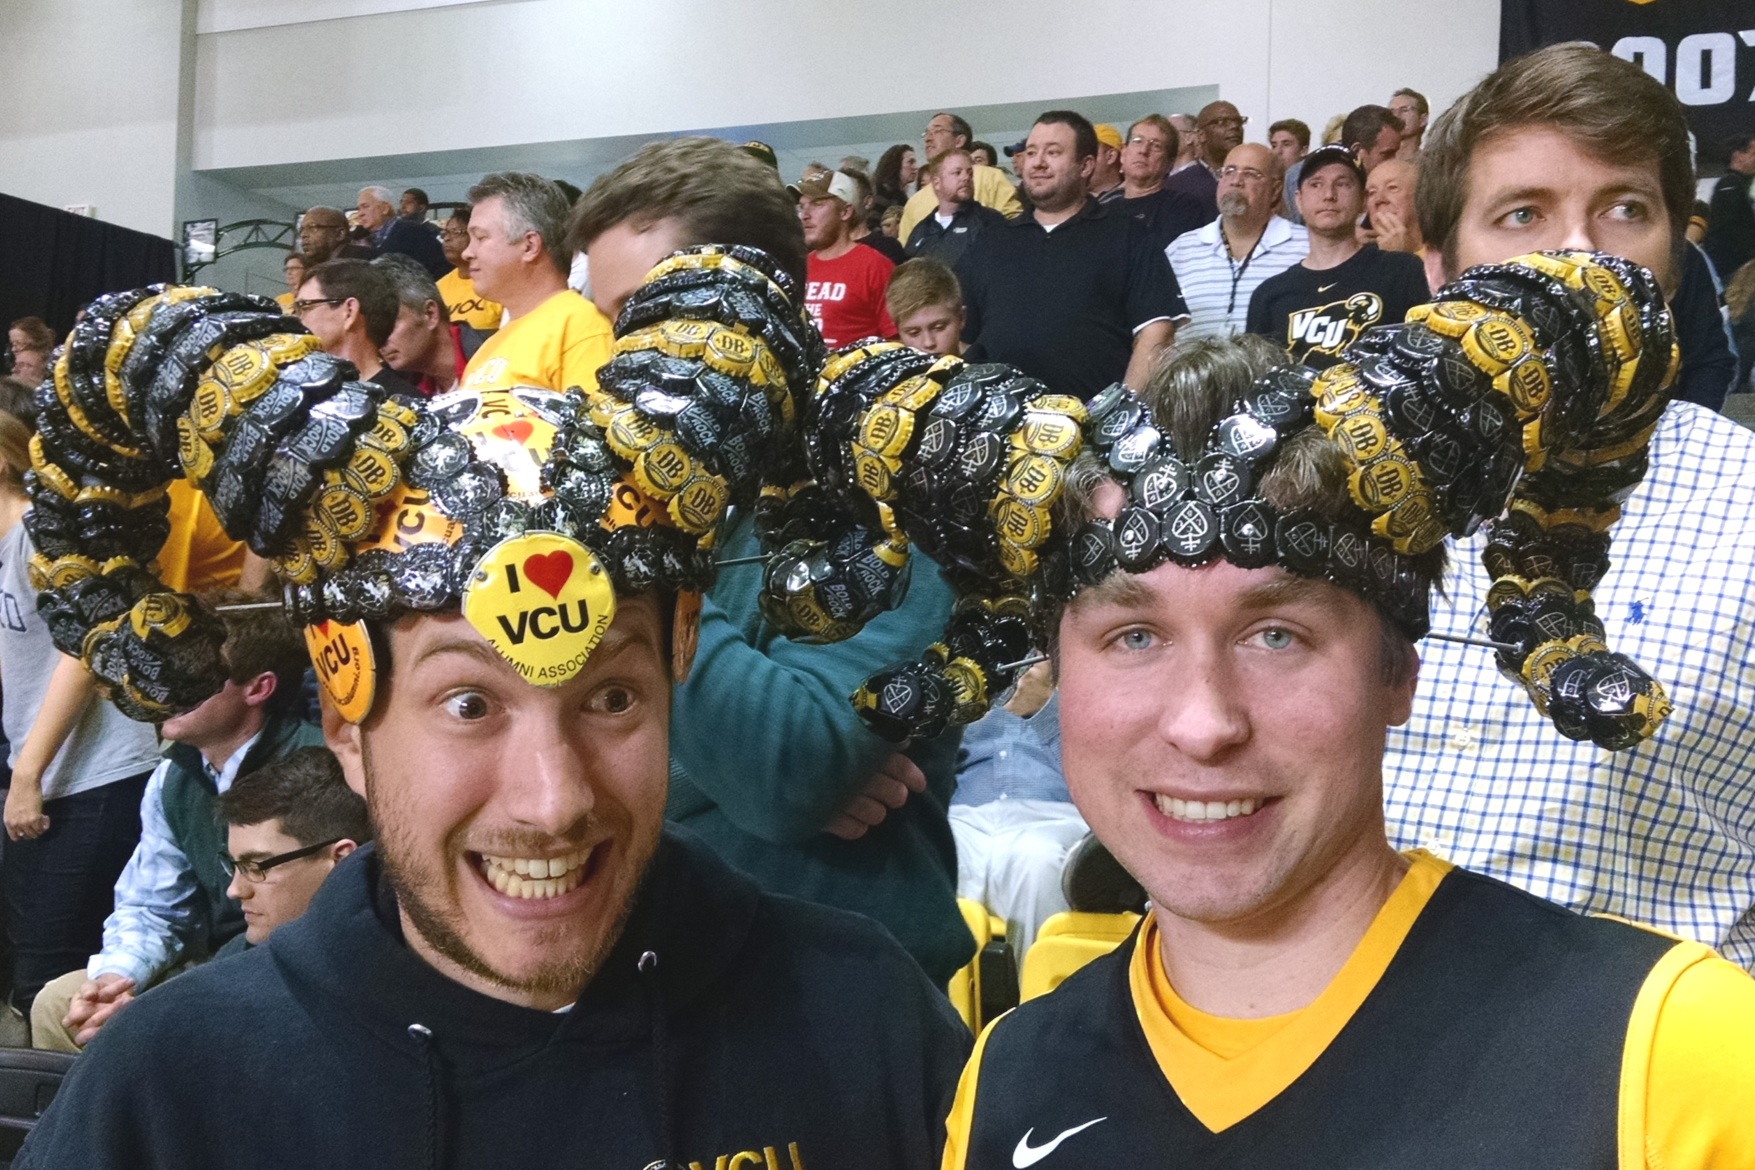  My friend, Steven, and me at a VCU Rams basketball game. 